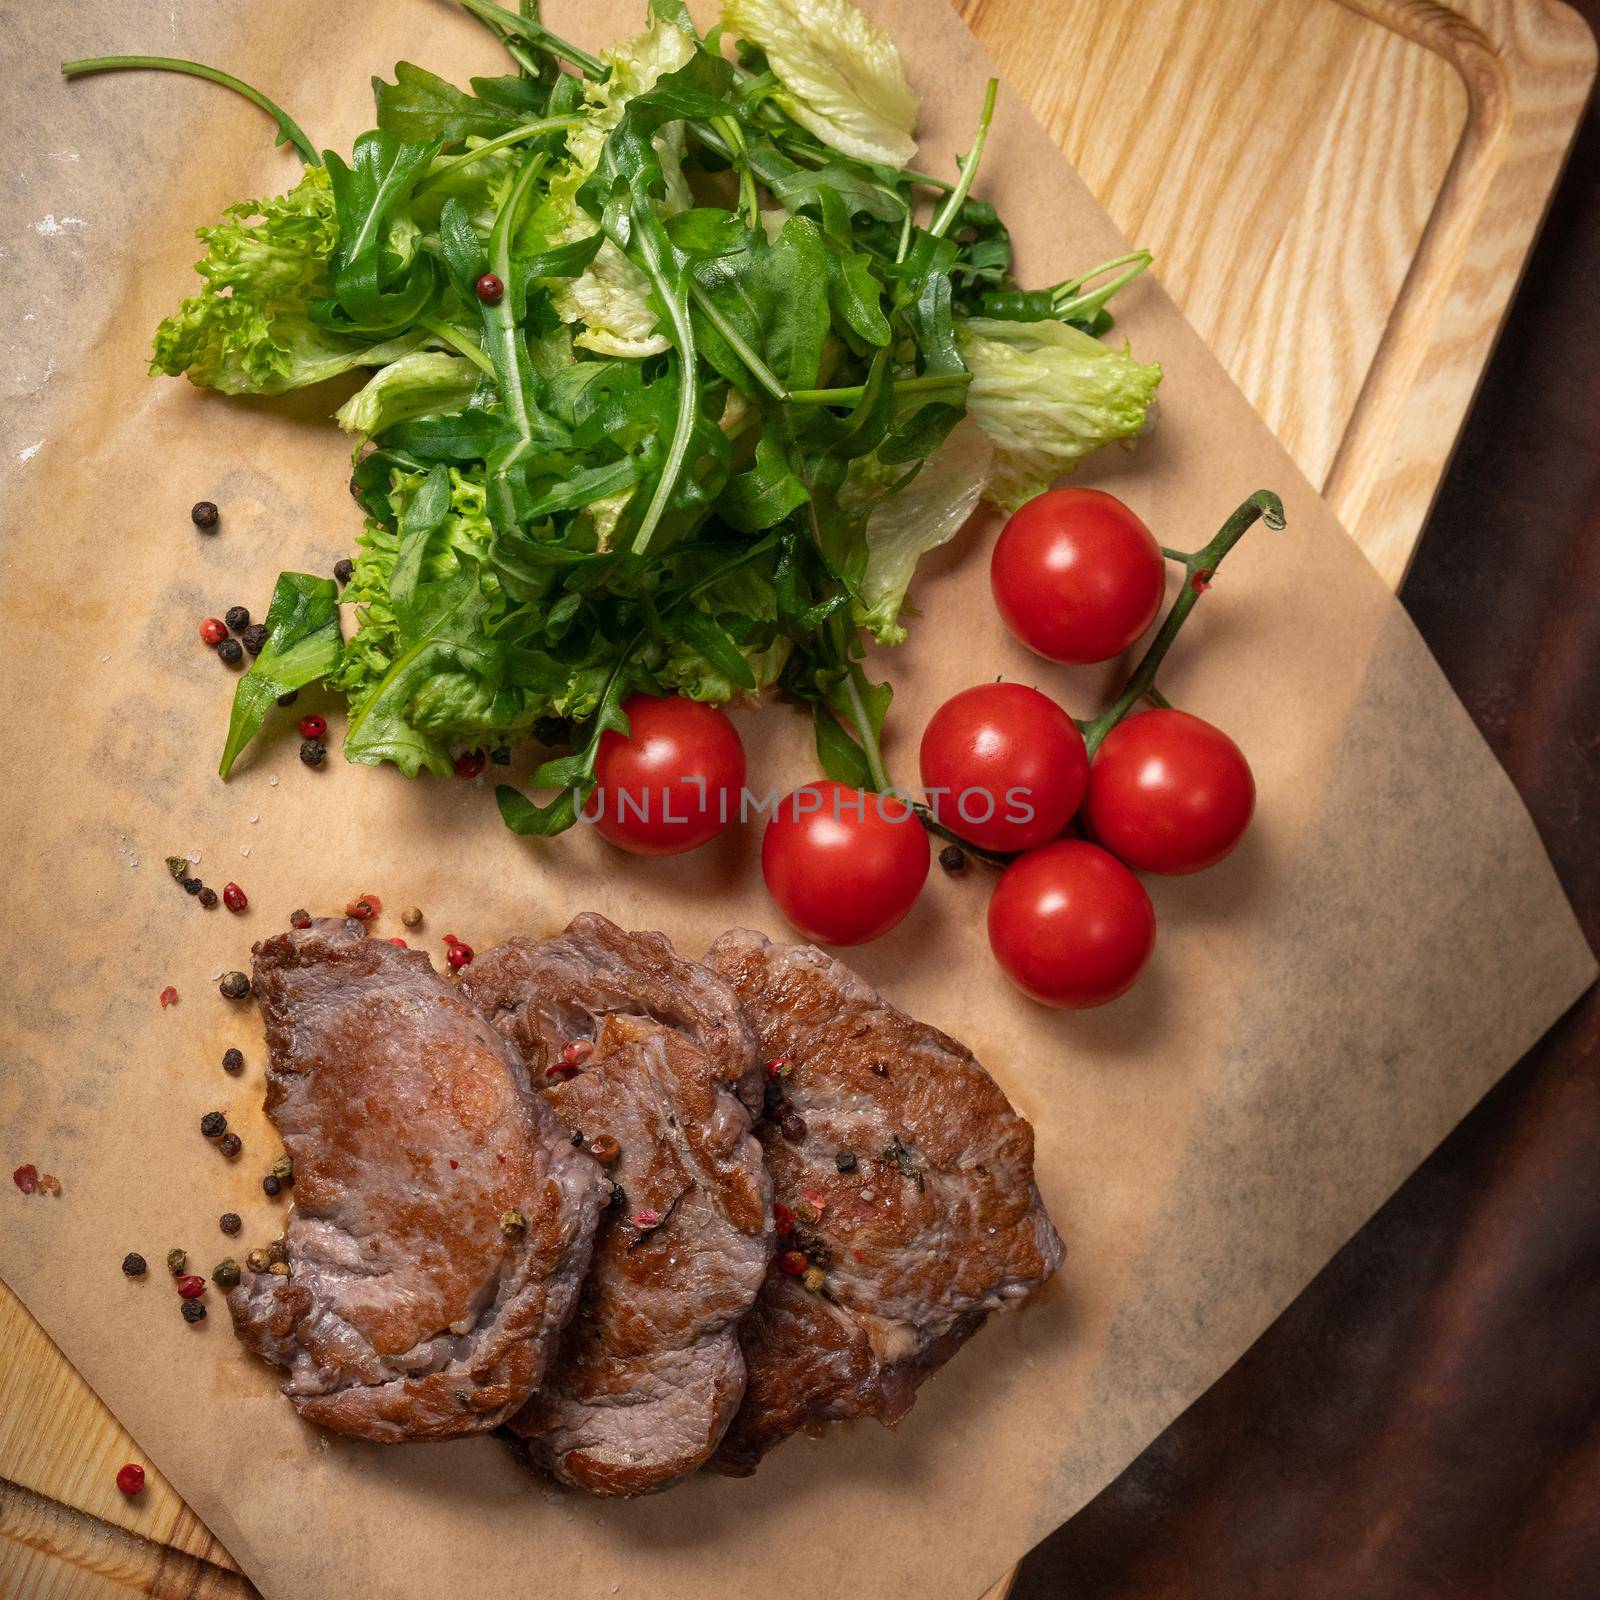 Grilled beef steak with fresh lettuce salad with arugula seeded pepper mixture and cherry tomatoes. Restaurant concept. Restaurant food. Grill concept. Square cropped.